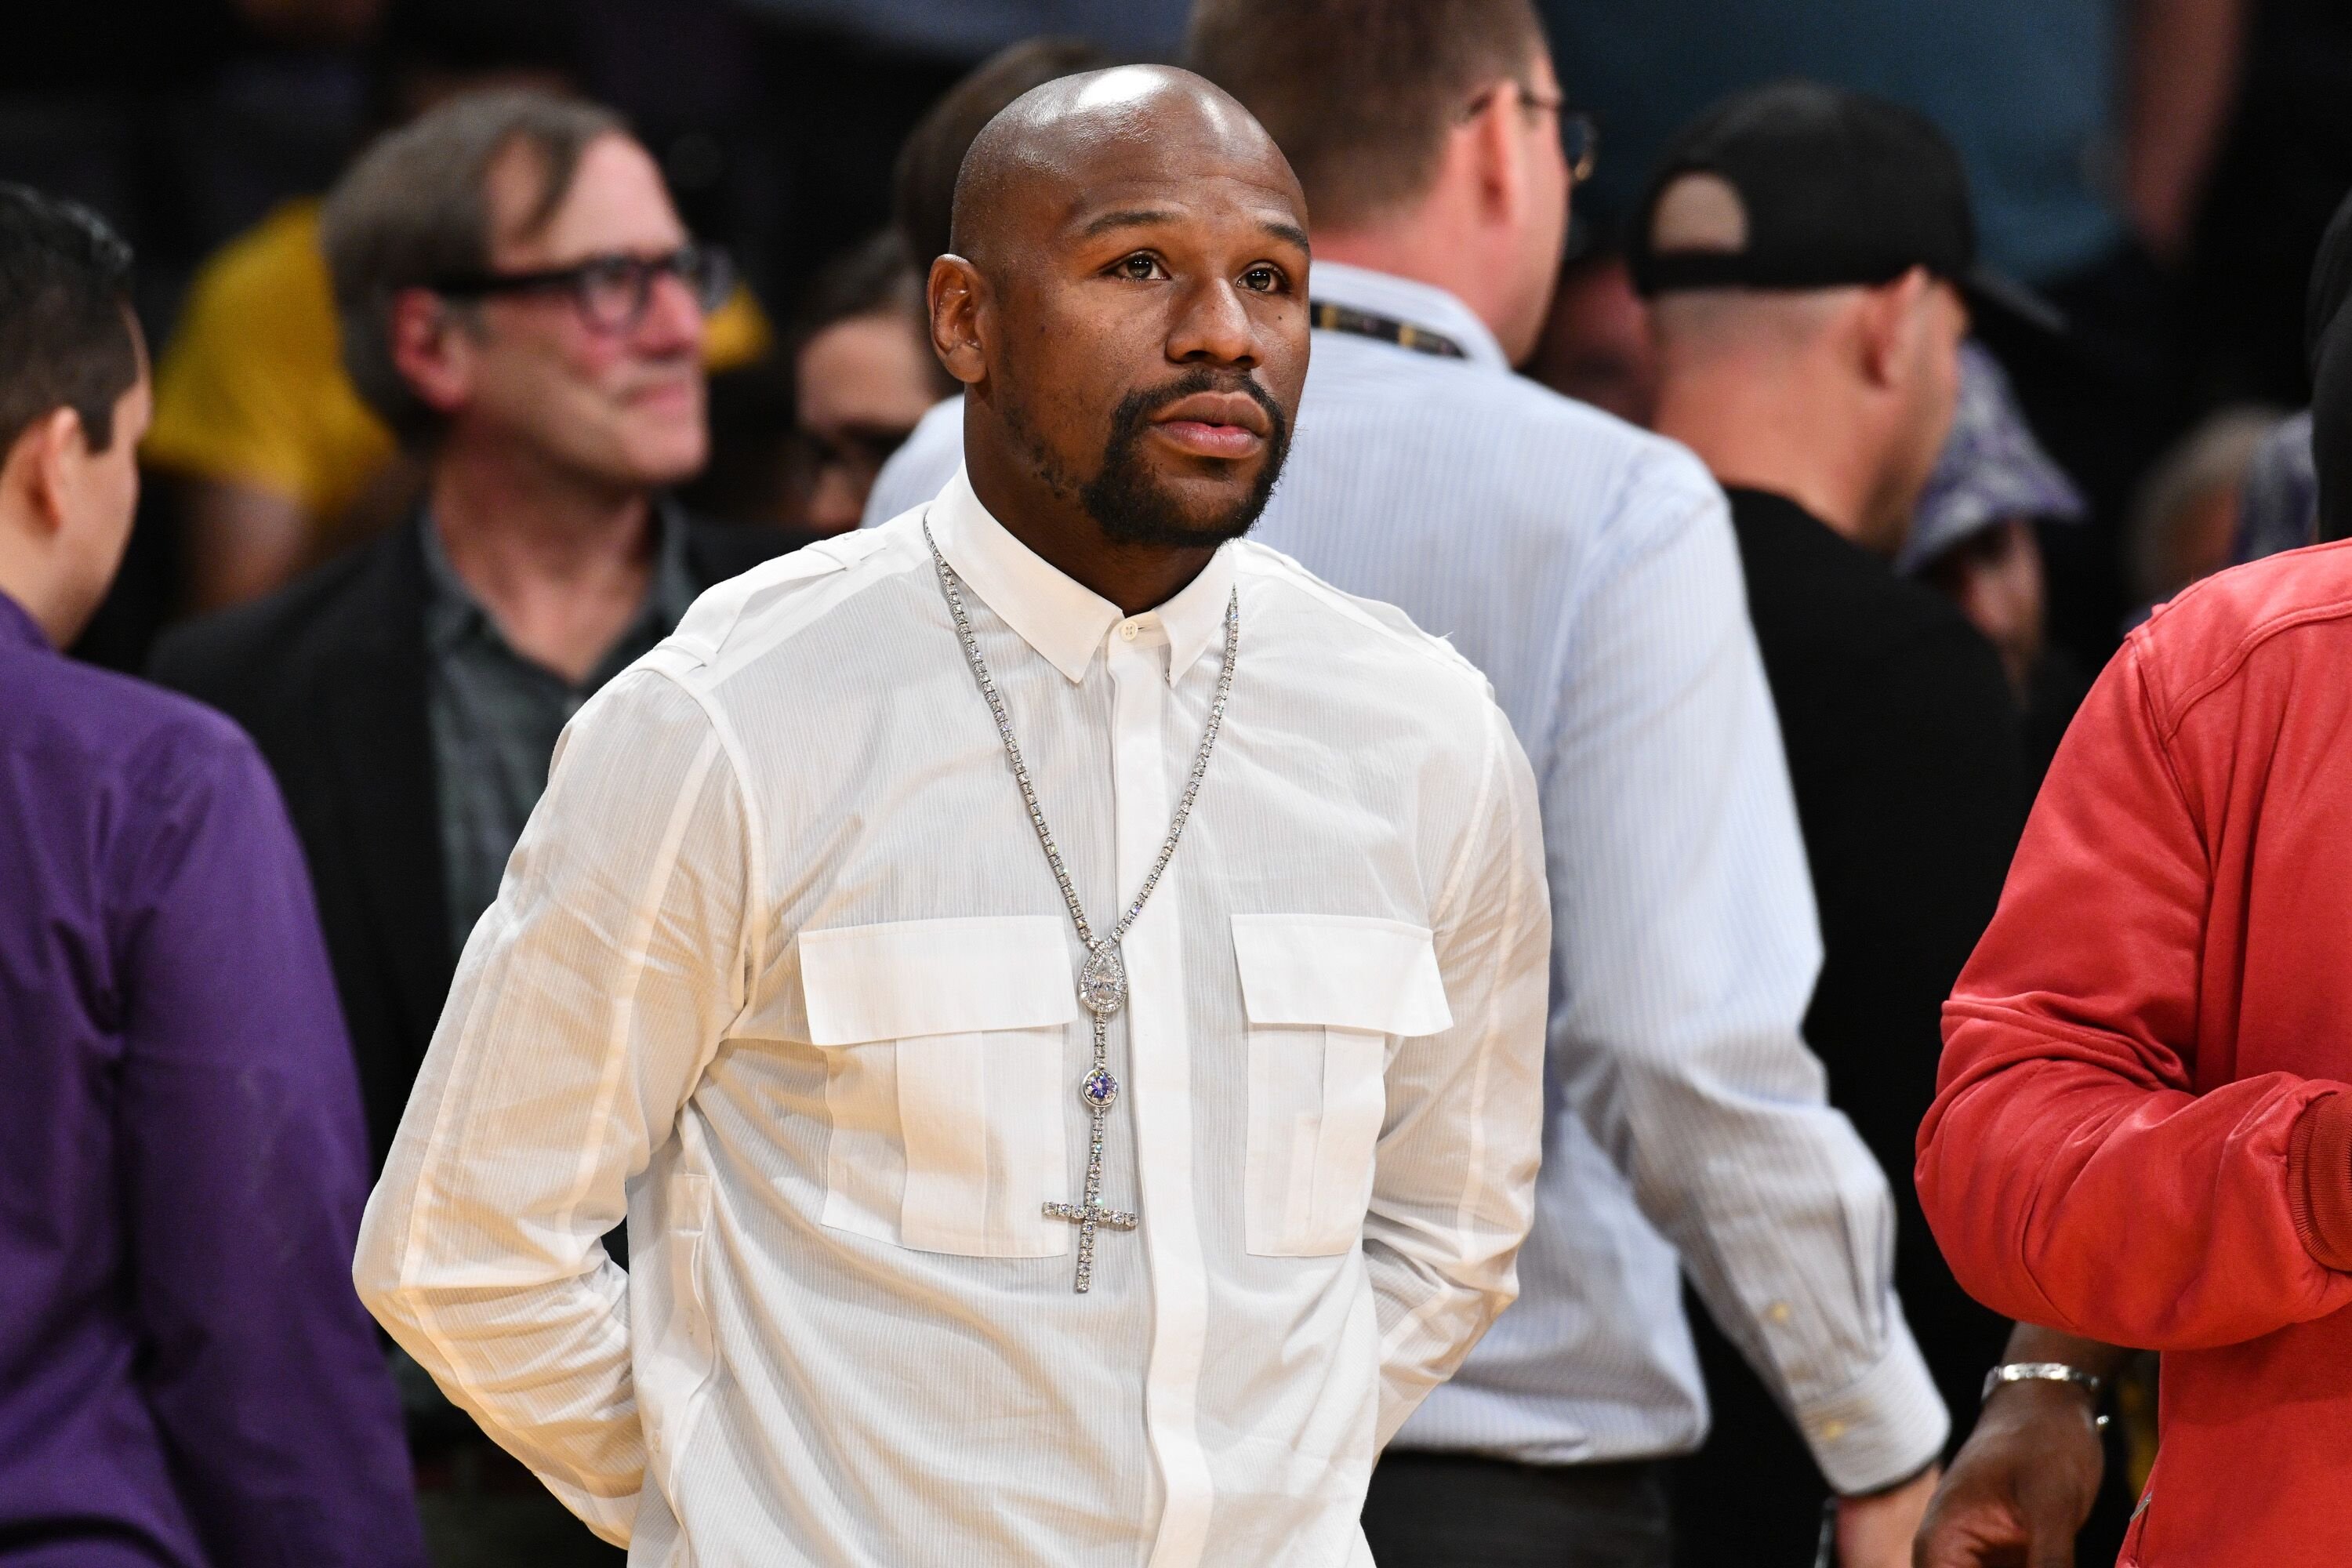 Floyd Mayweather Celebrates His Son Zion's 19th Birthday With a Photo